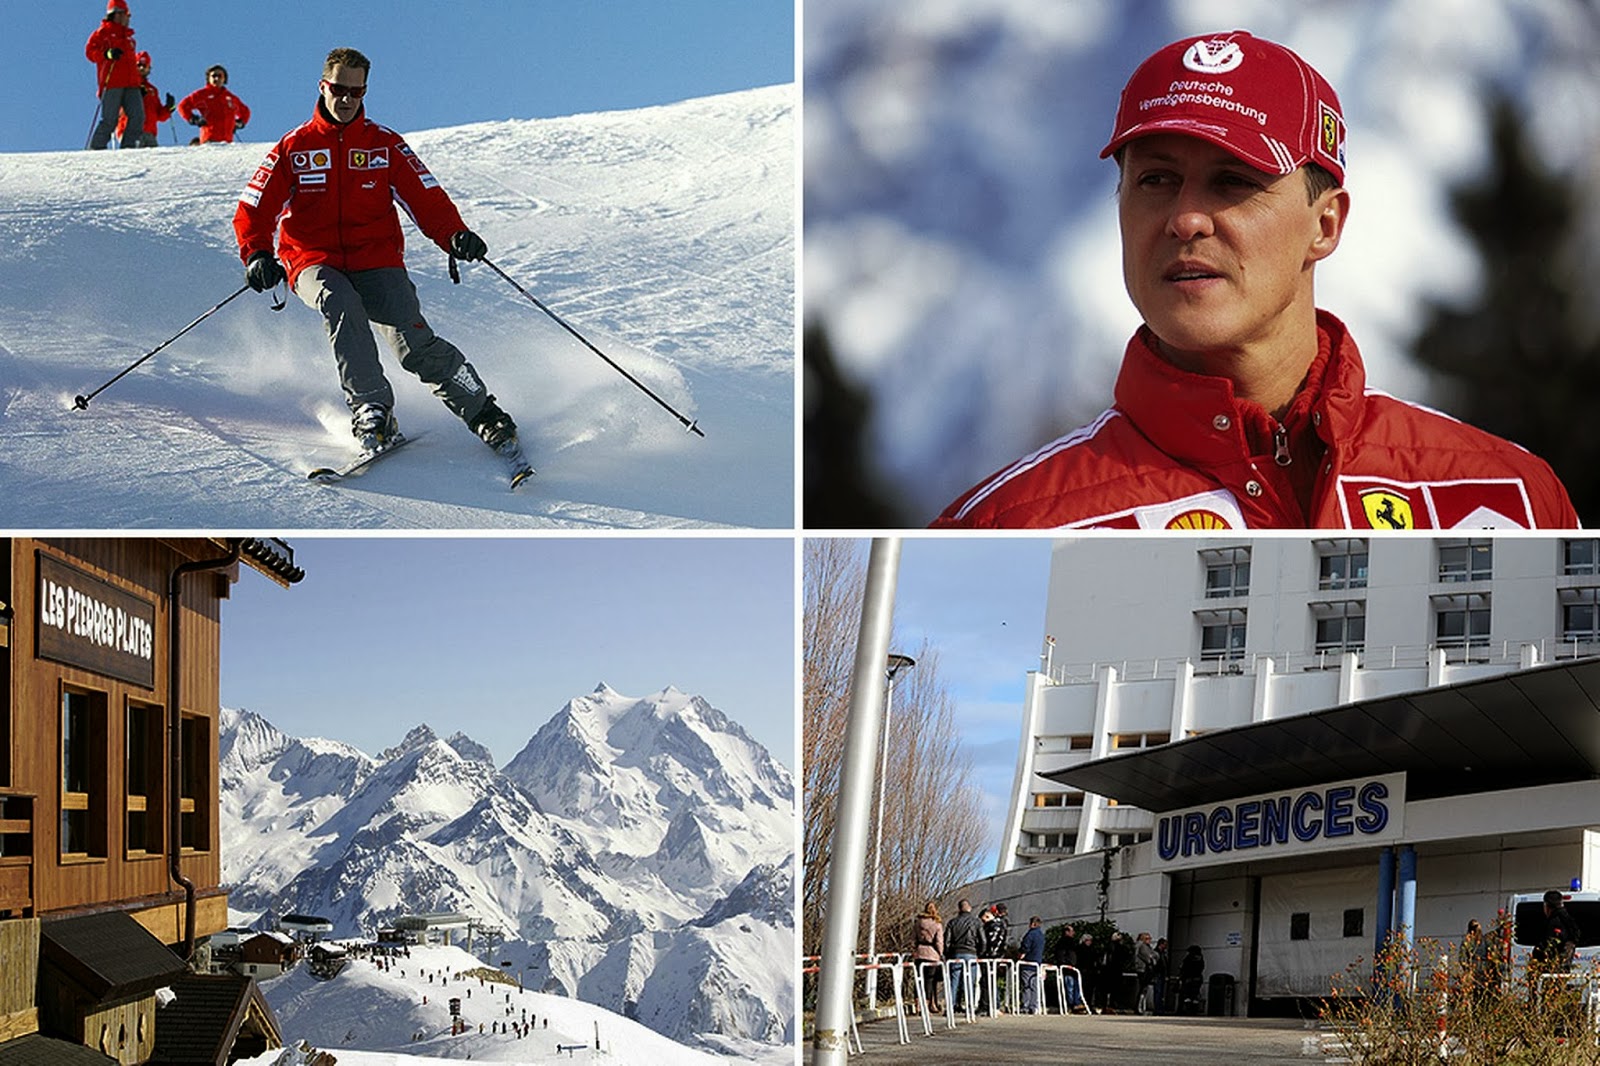 F1 Legend Michael Schumacher Injured in Skiing Accident in France | We Obsessively Cover the ...